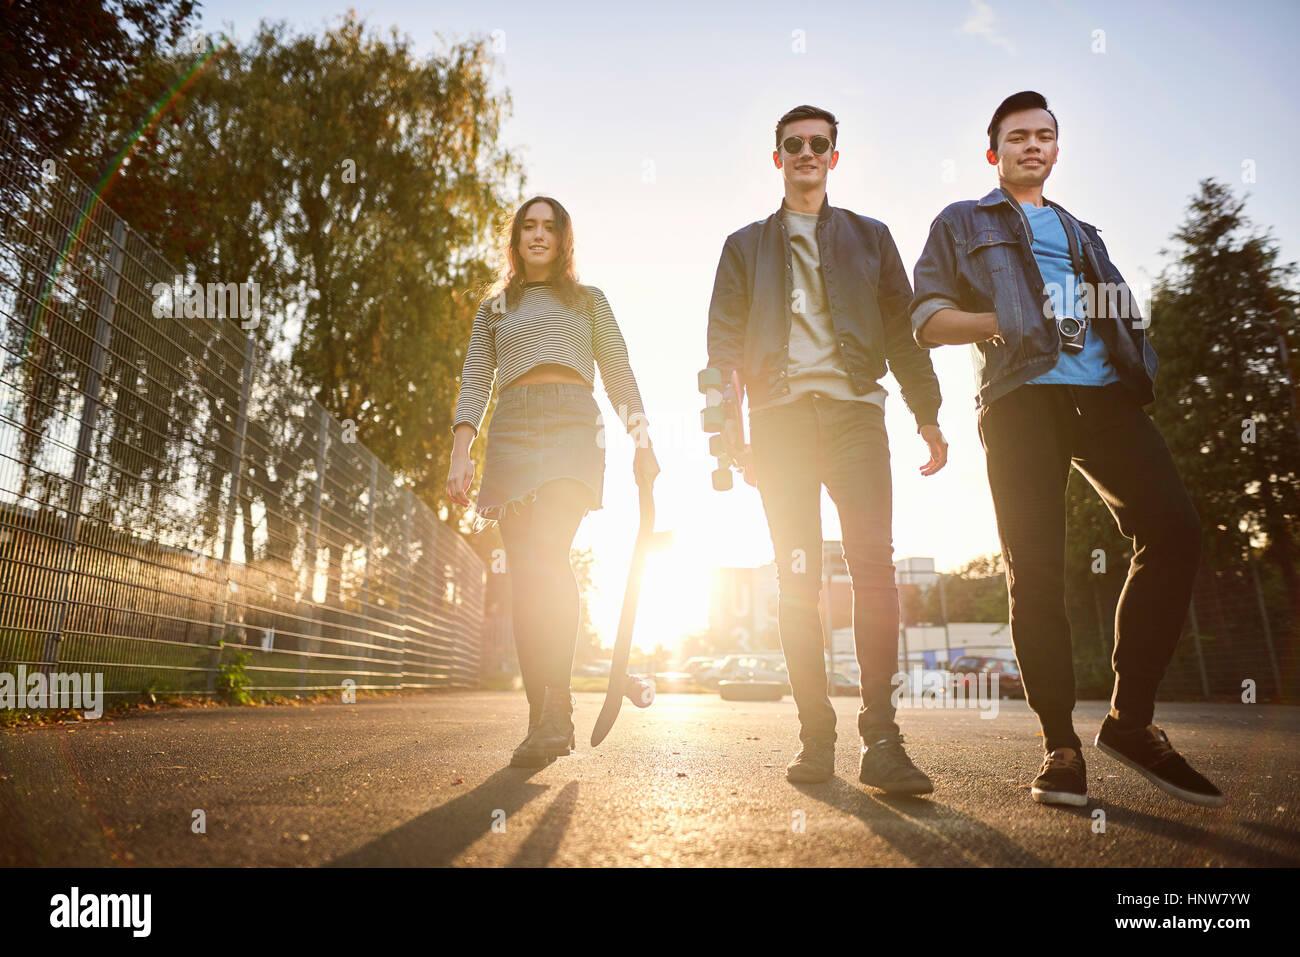 Portrait of young female skateboarder and male friends walking on sunlit street Stock Photo